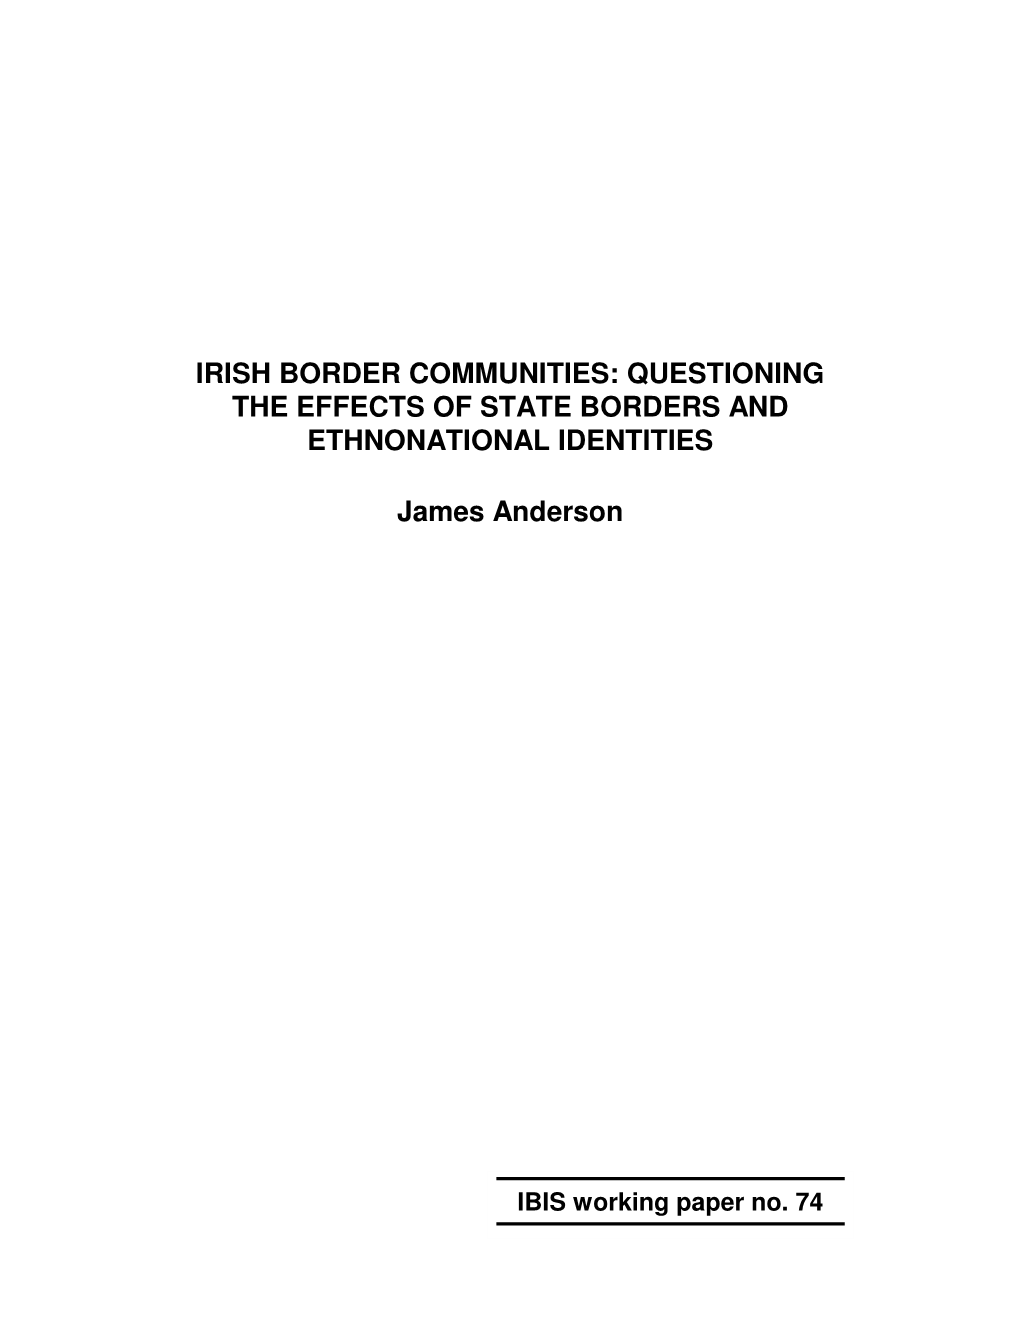 Irish Border Communities: Questioning the Effects of State Borders and Ethnonational Identities